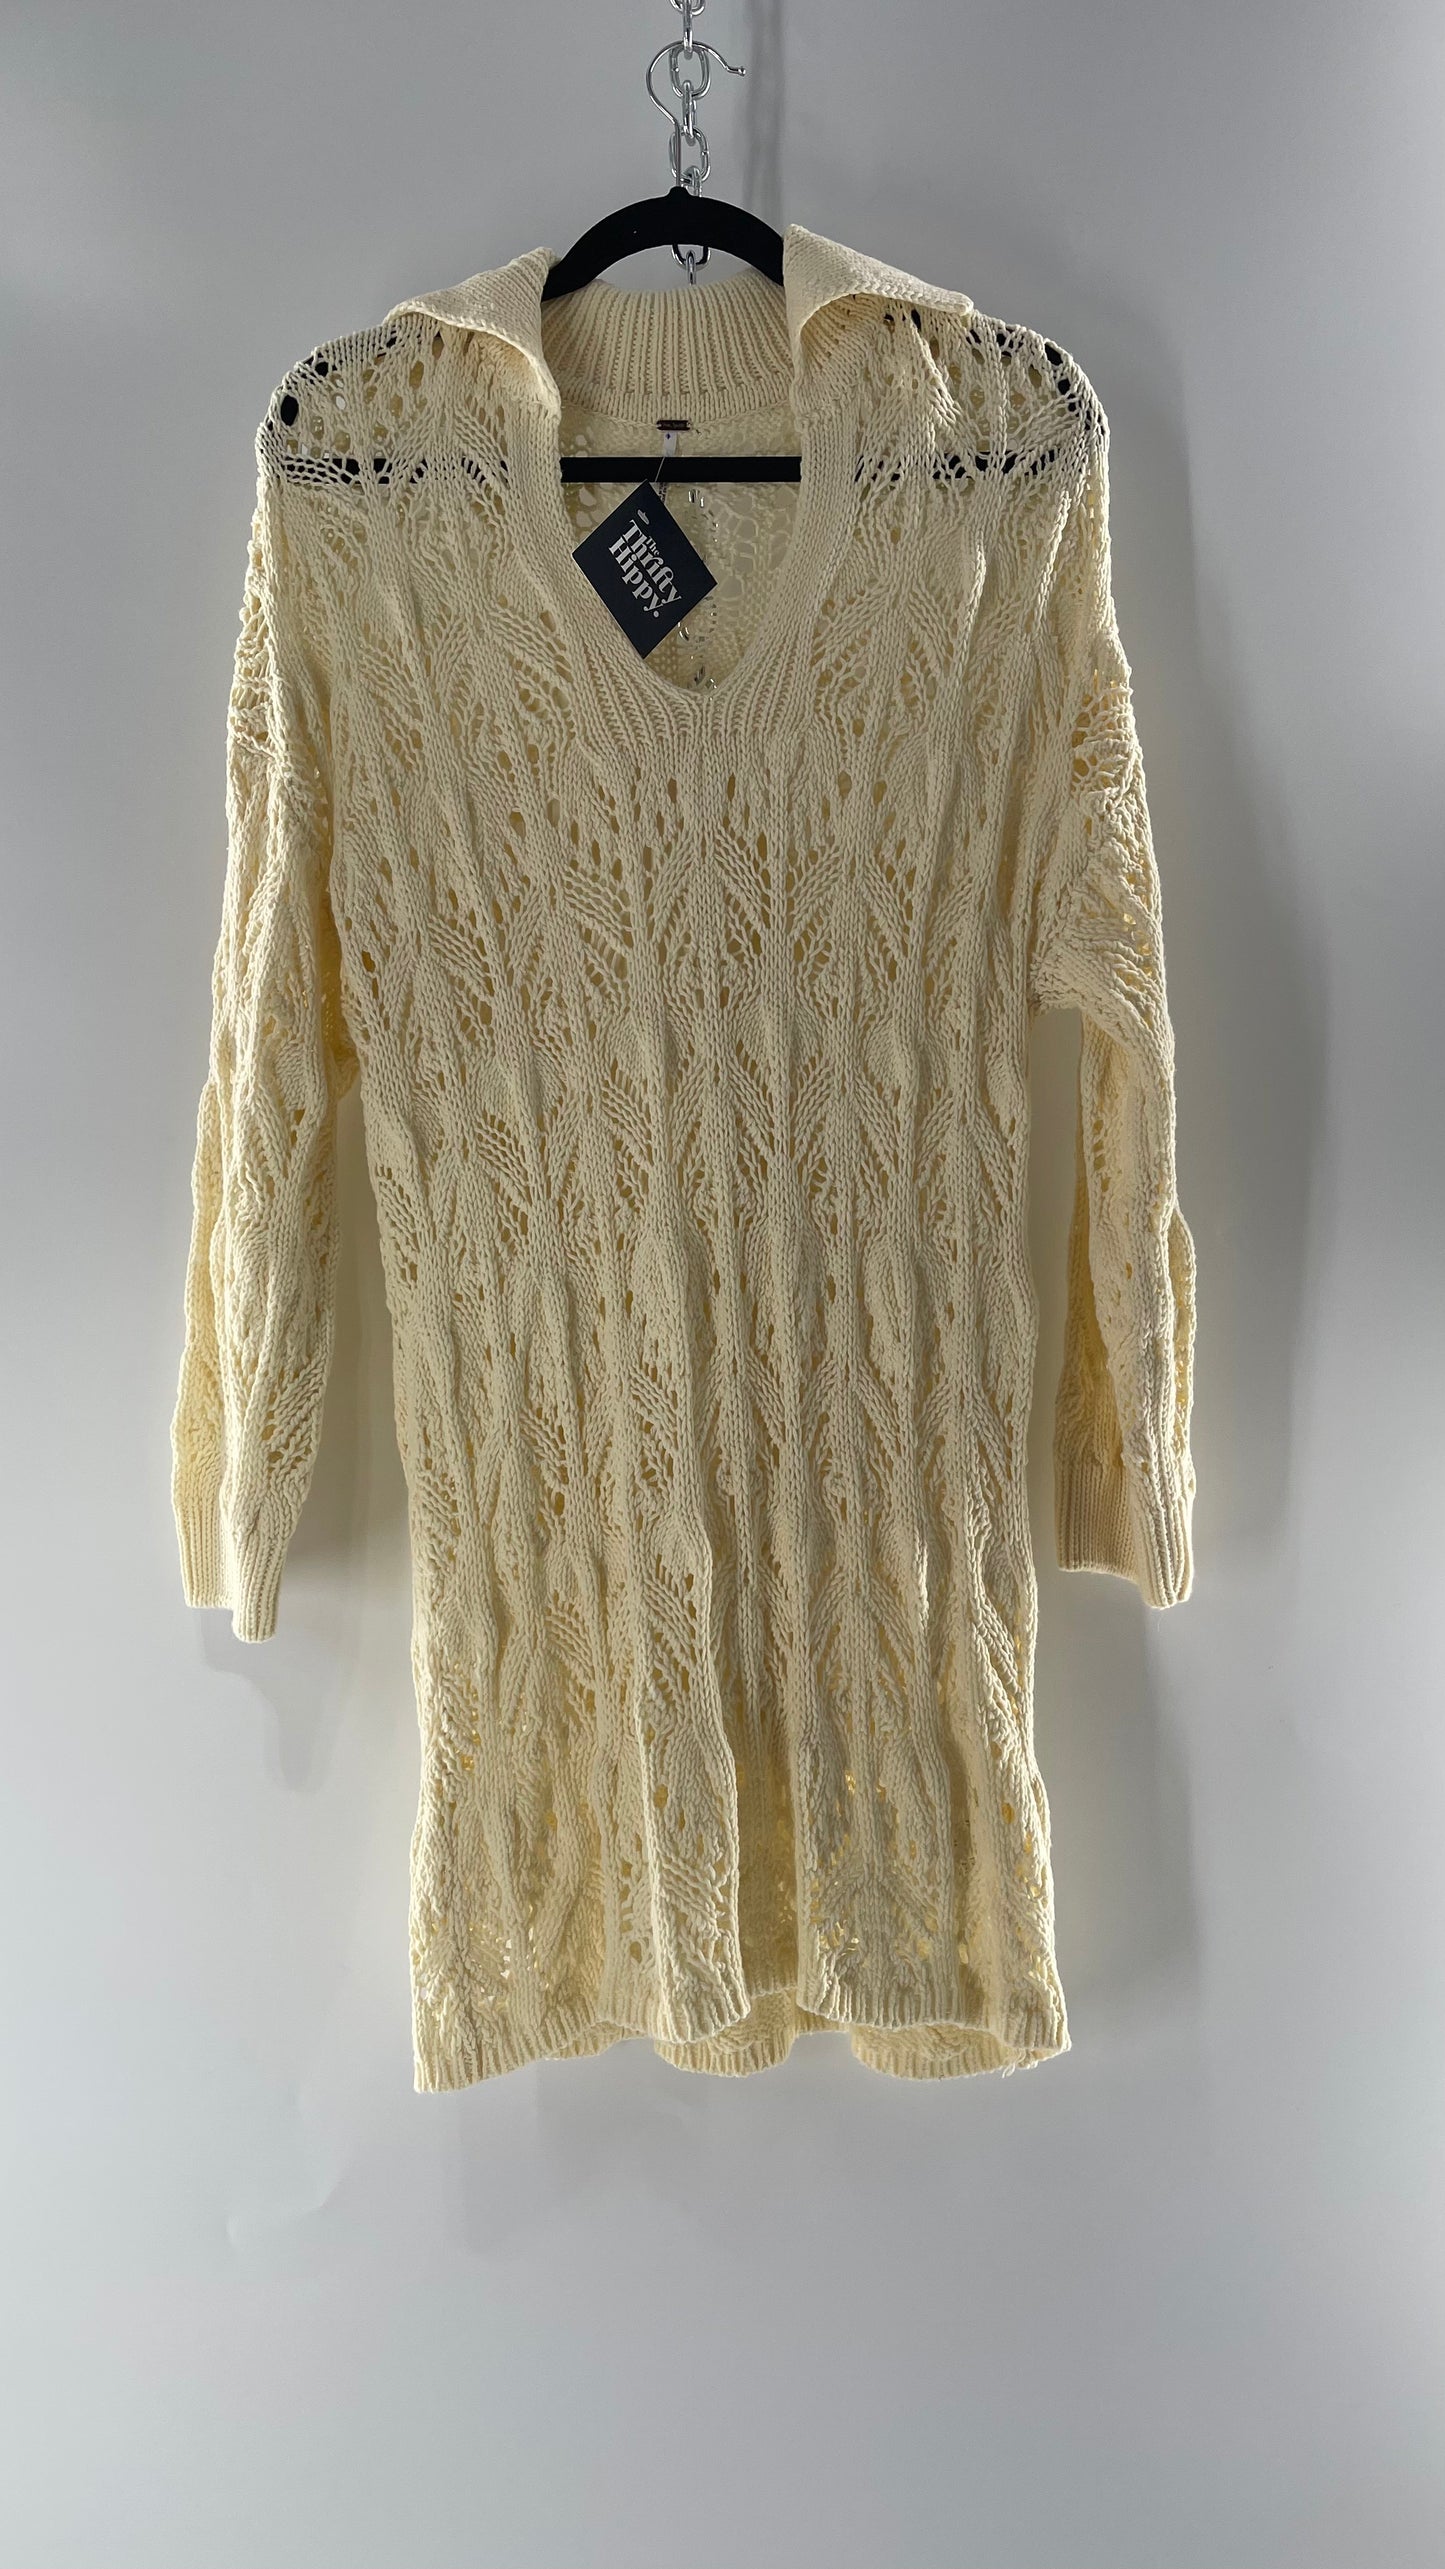 Free People Baby Yellow Comfy n Cozy Open Stitch Knit Sweater Dress (XS)